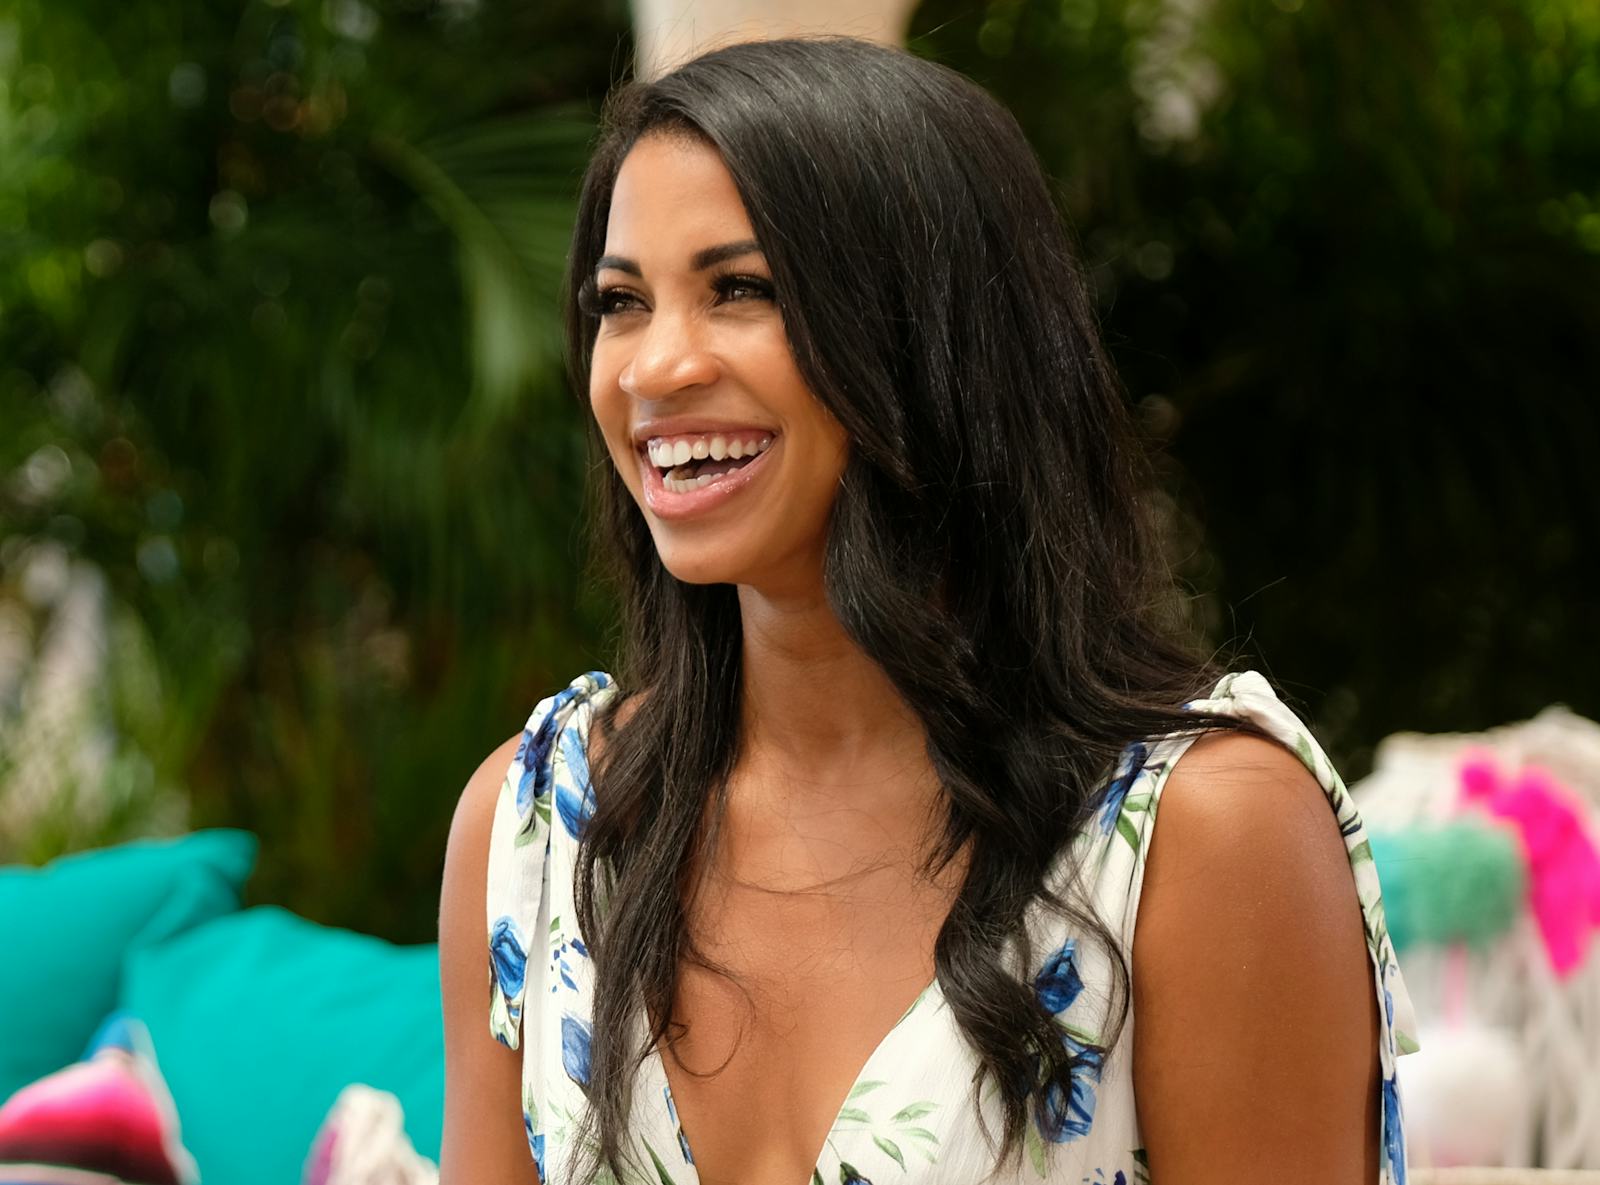 Are Katie & Chris Still Together After 'Bachelor In Paradise'? They're